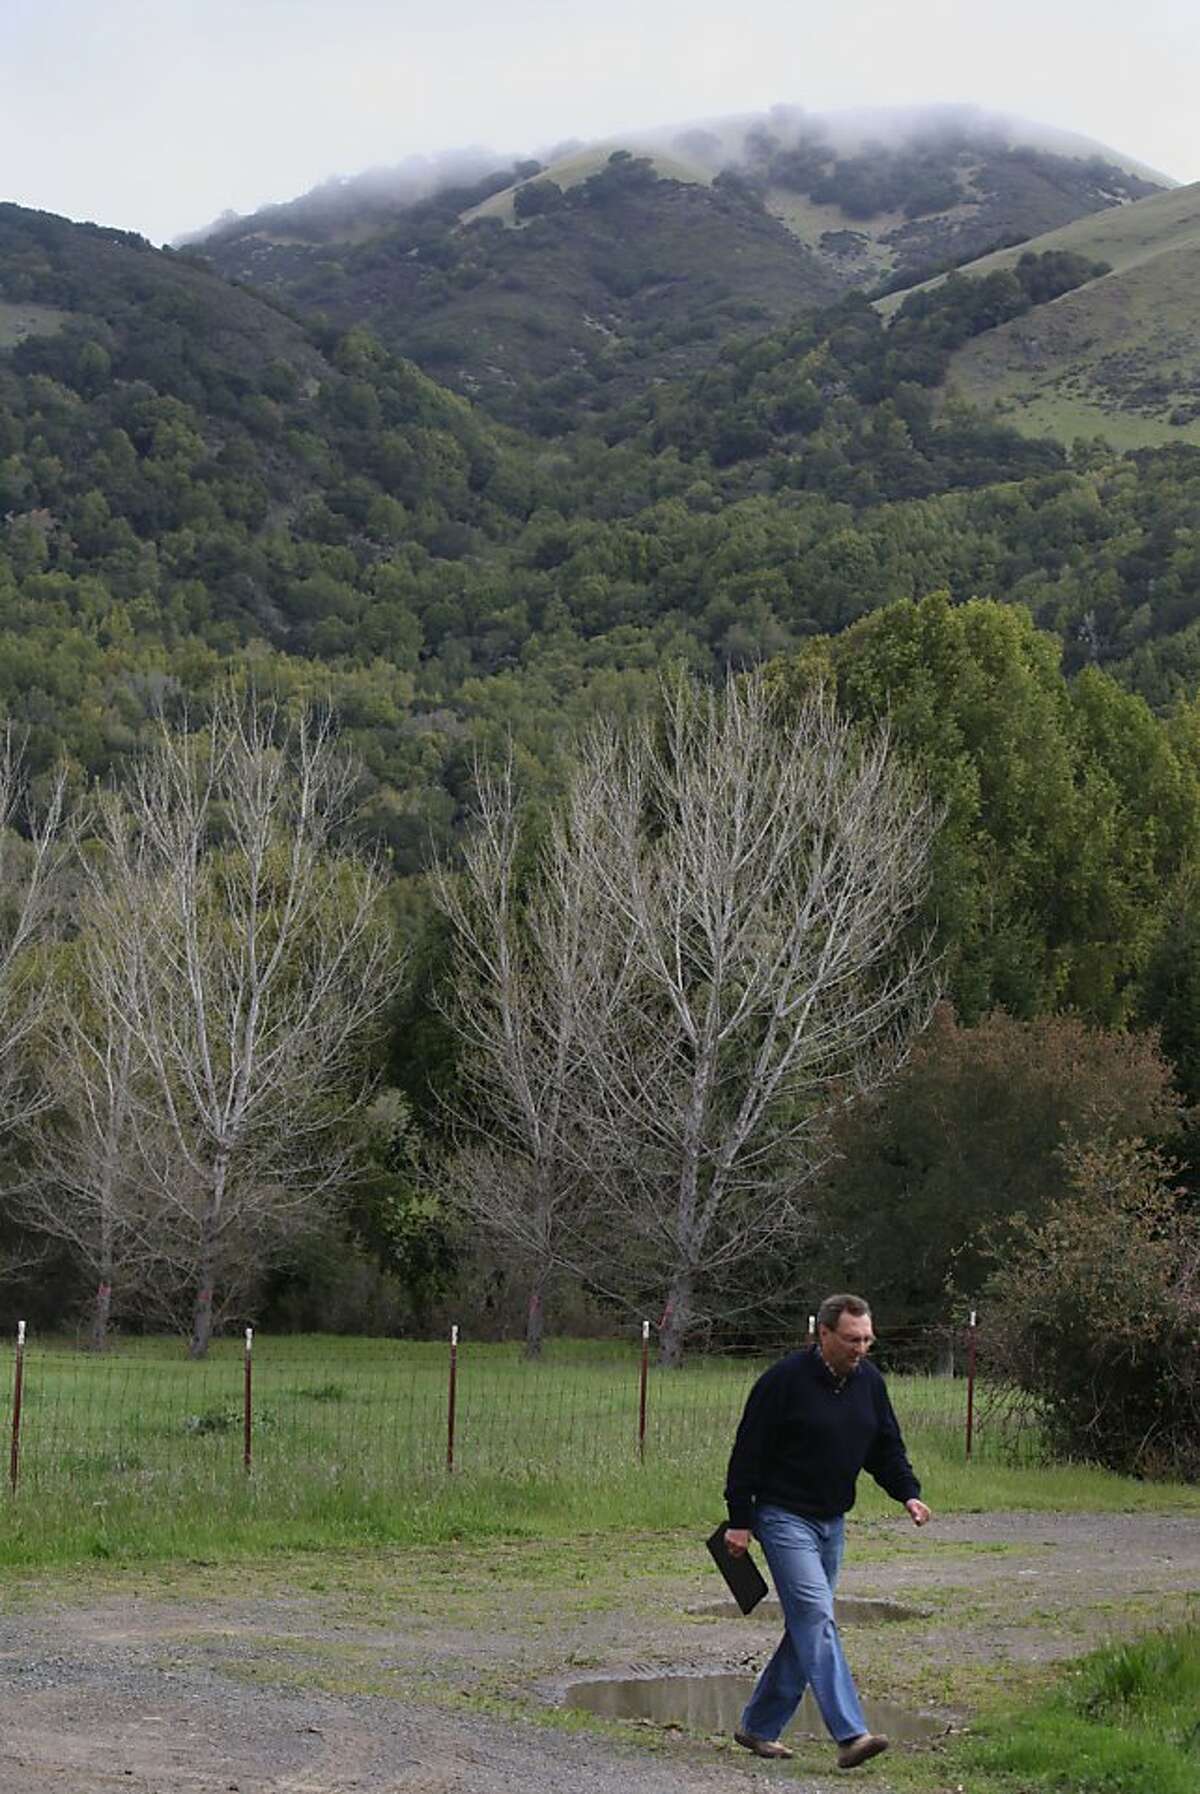 George Lucas will be building a 270,000 square foot digital media production compound on Grady Ranch in San Rafael, Calif., just past the cyprus trees seen in the background as neighbor and environmental consultant Carl Fricke walks on the planned driveway to the complex on Friday, March 30, 2012.